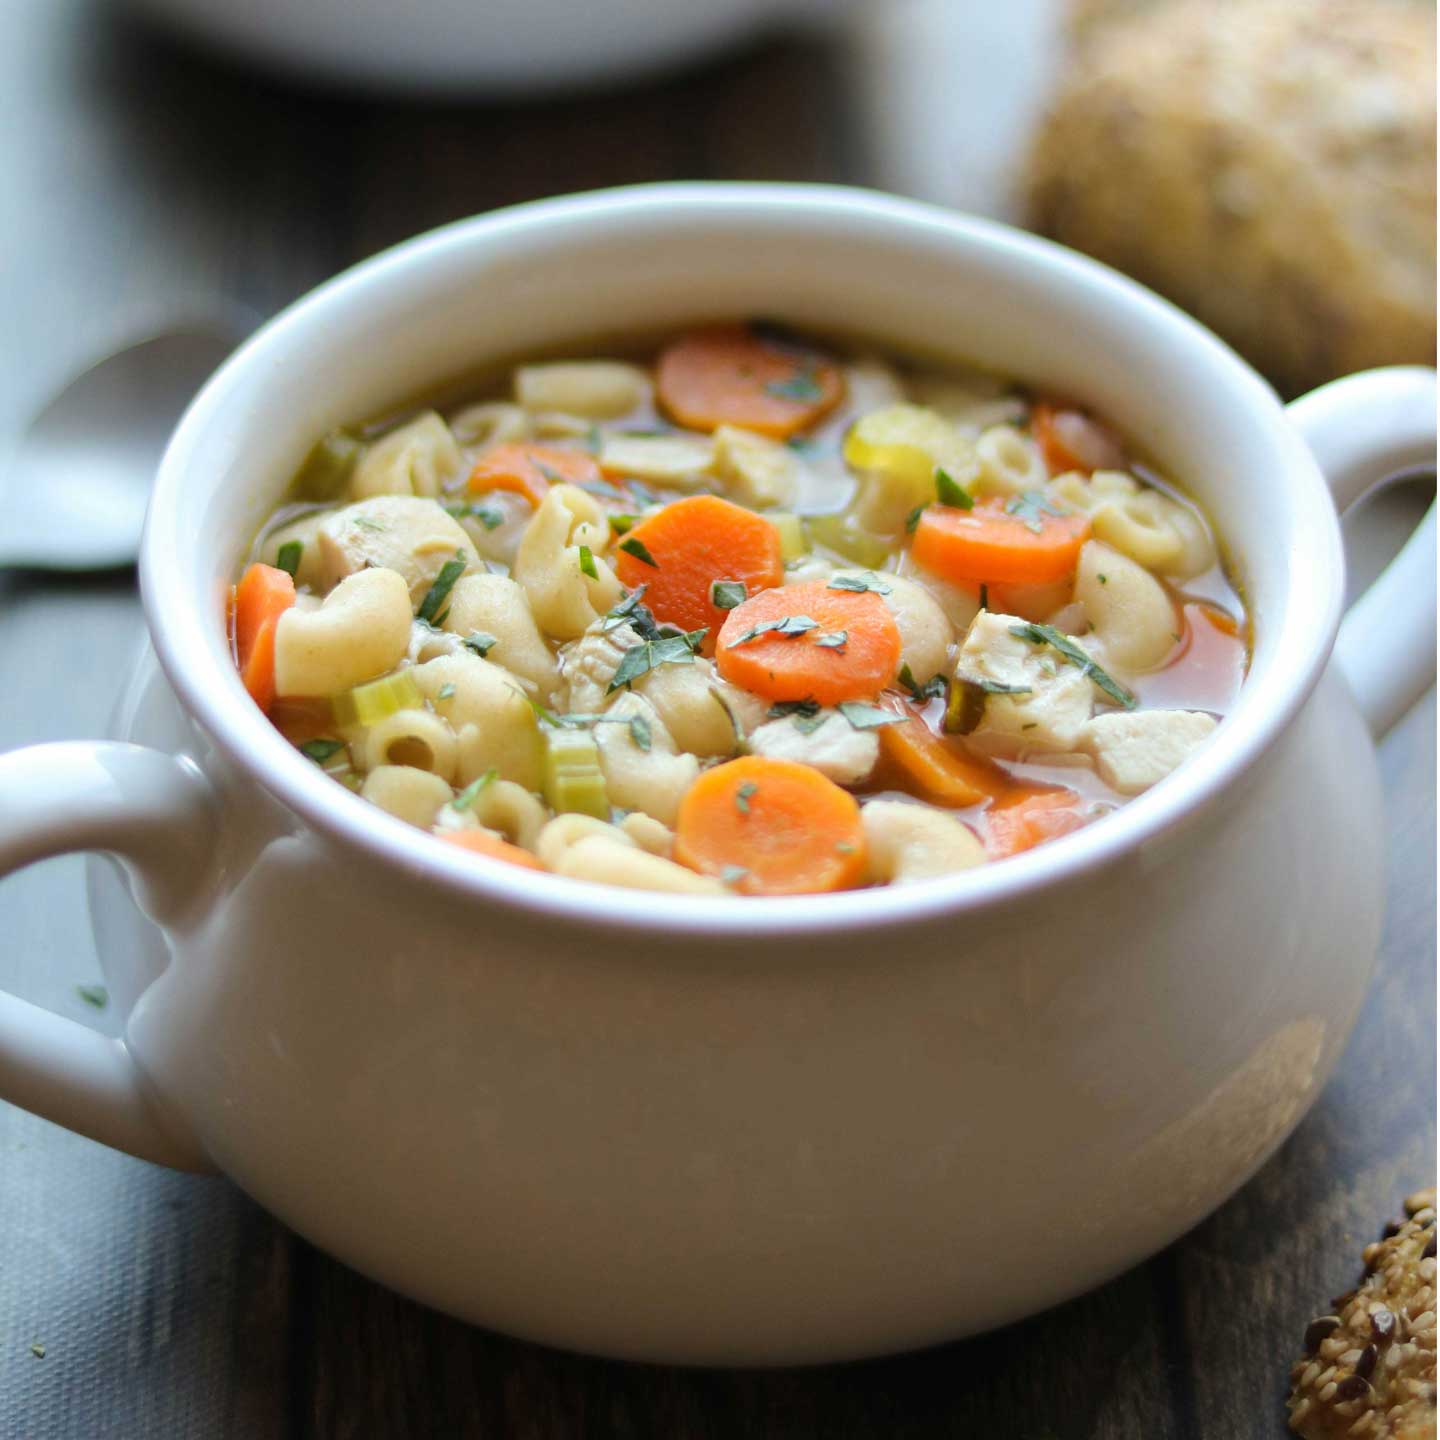 https://twohealthykitchens.com/wp-content/uploads/2018/01/Quick-Easy-Chicken-Noodle-Soup-Rotisserie-Chicken-square.jpg